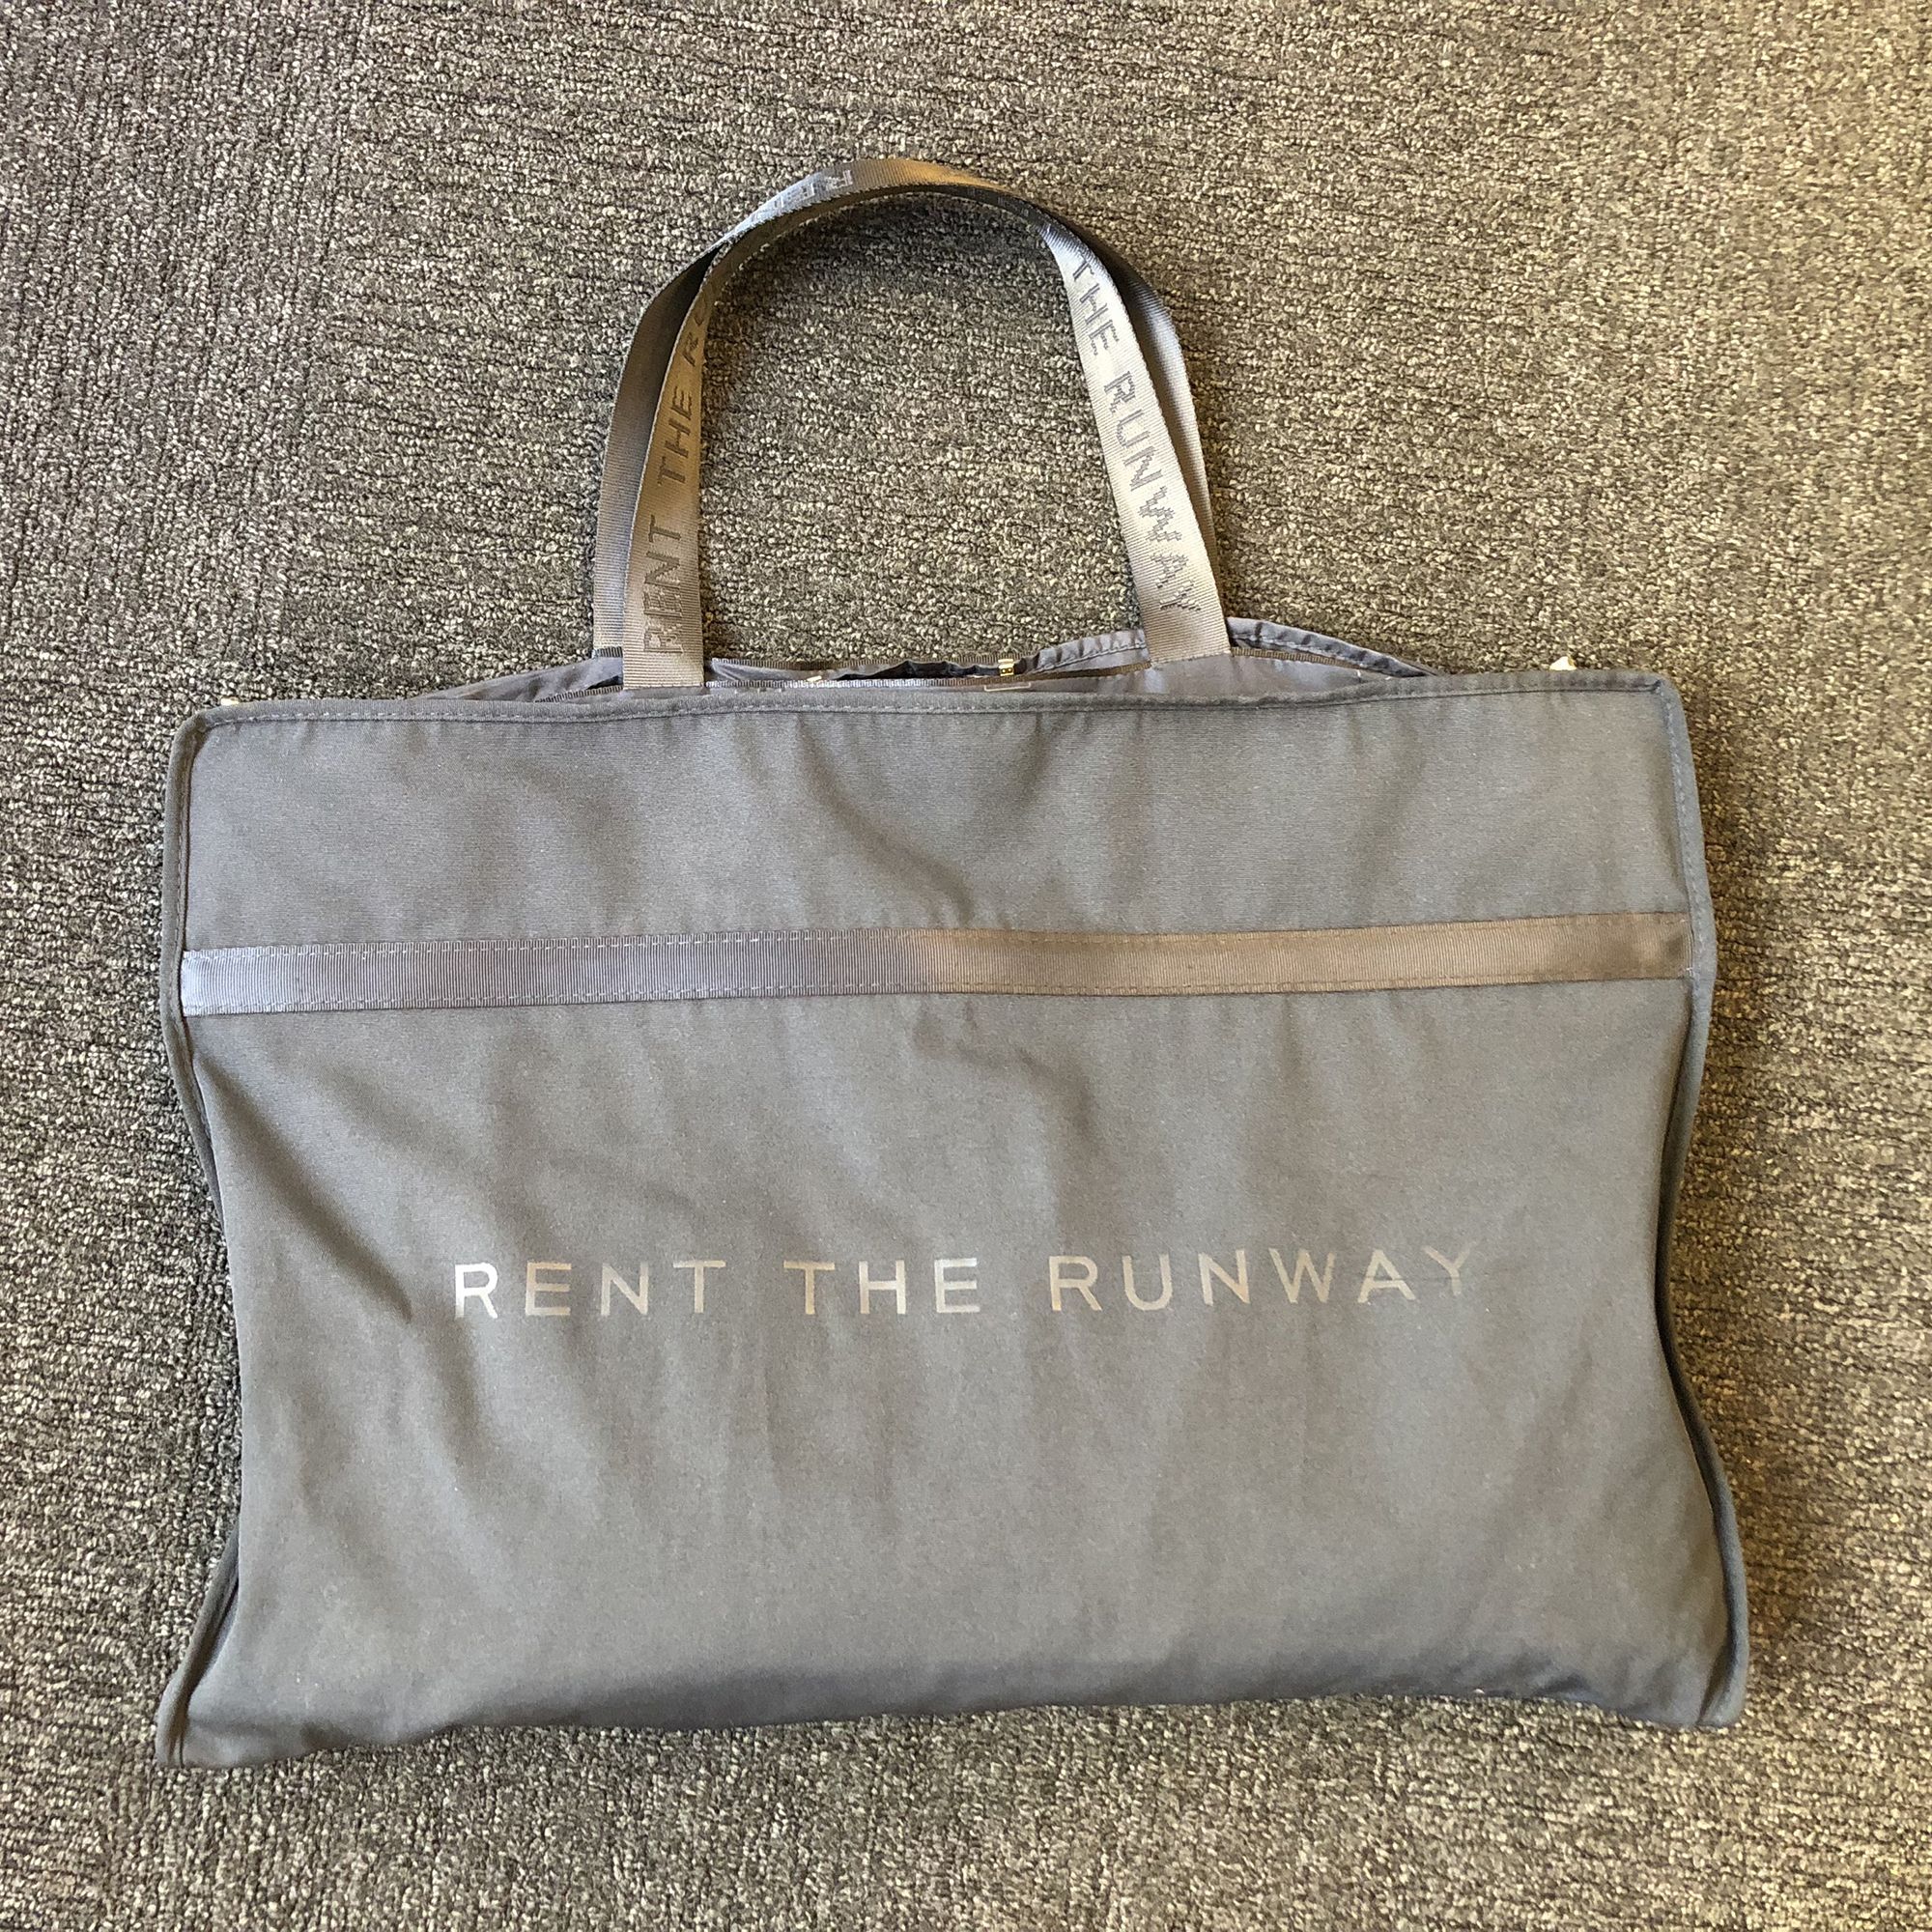 What bag from film and TV lives rent free in your brain? : r/handbags